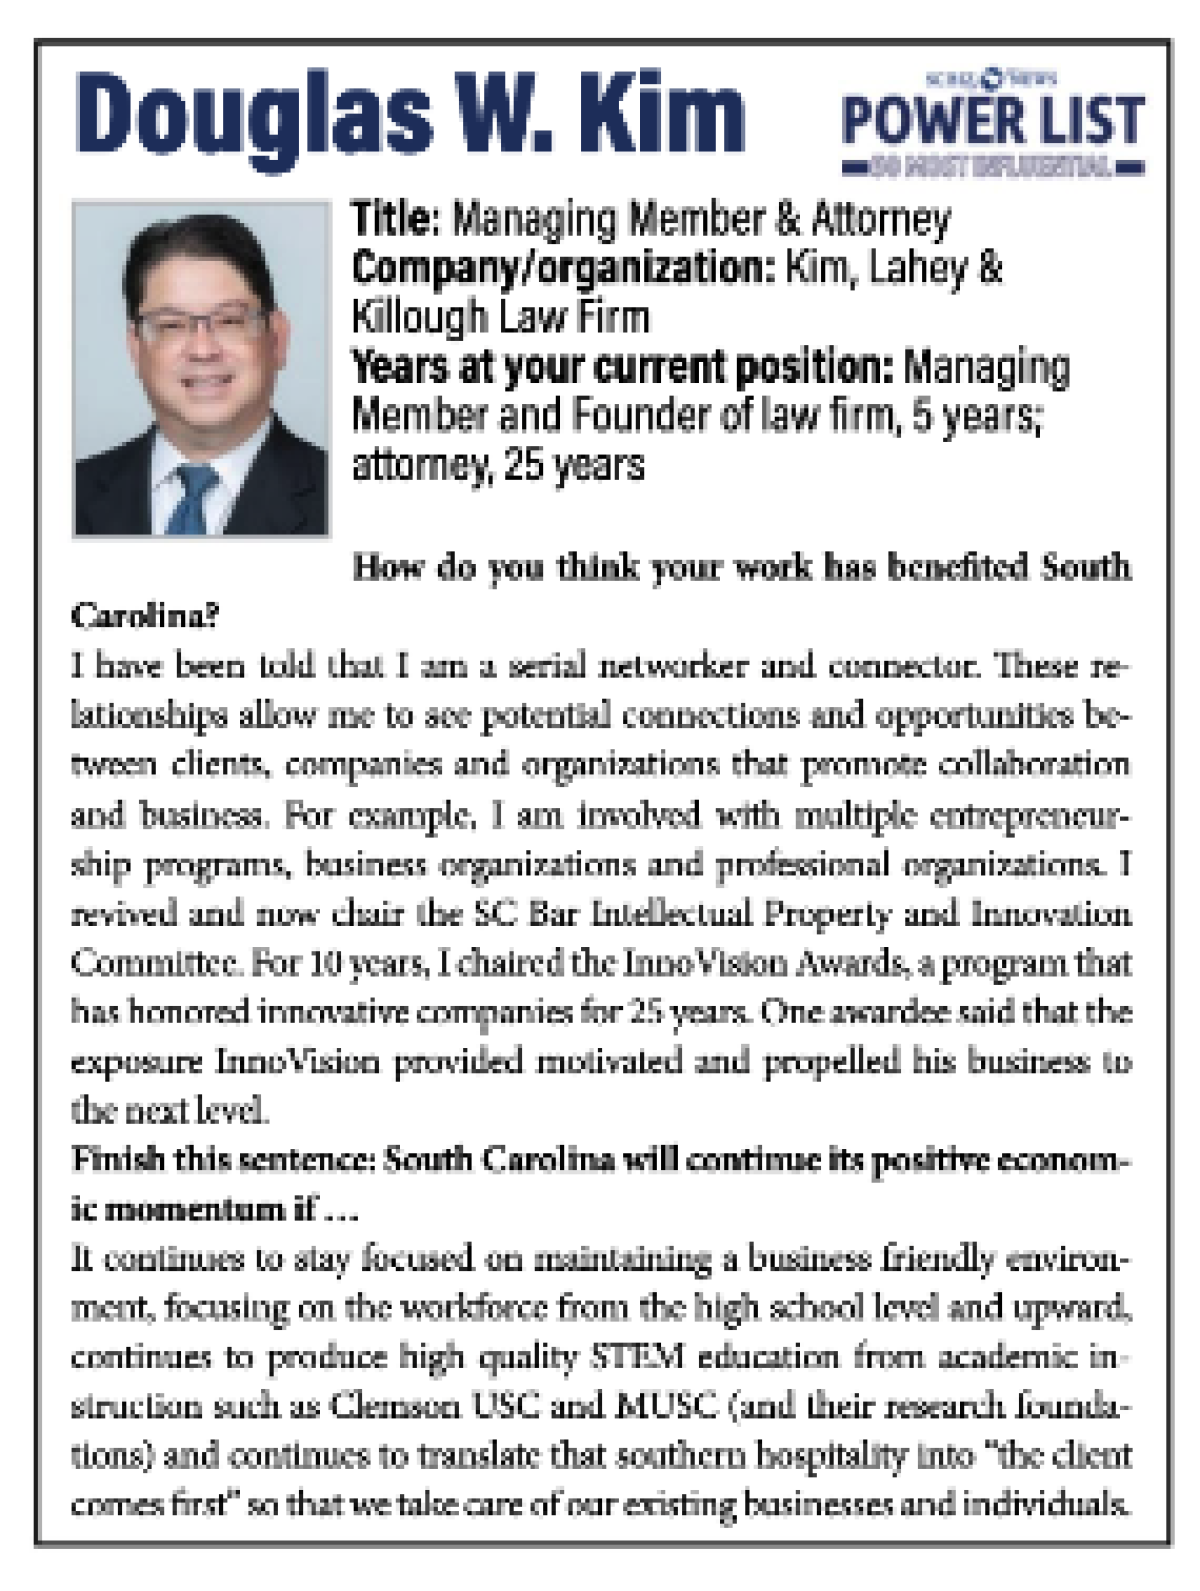 SC Biz News Selects Attorney Doug Kim for 50 Most Influential List 2023